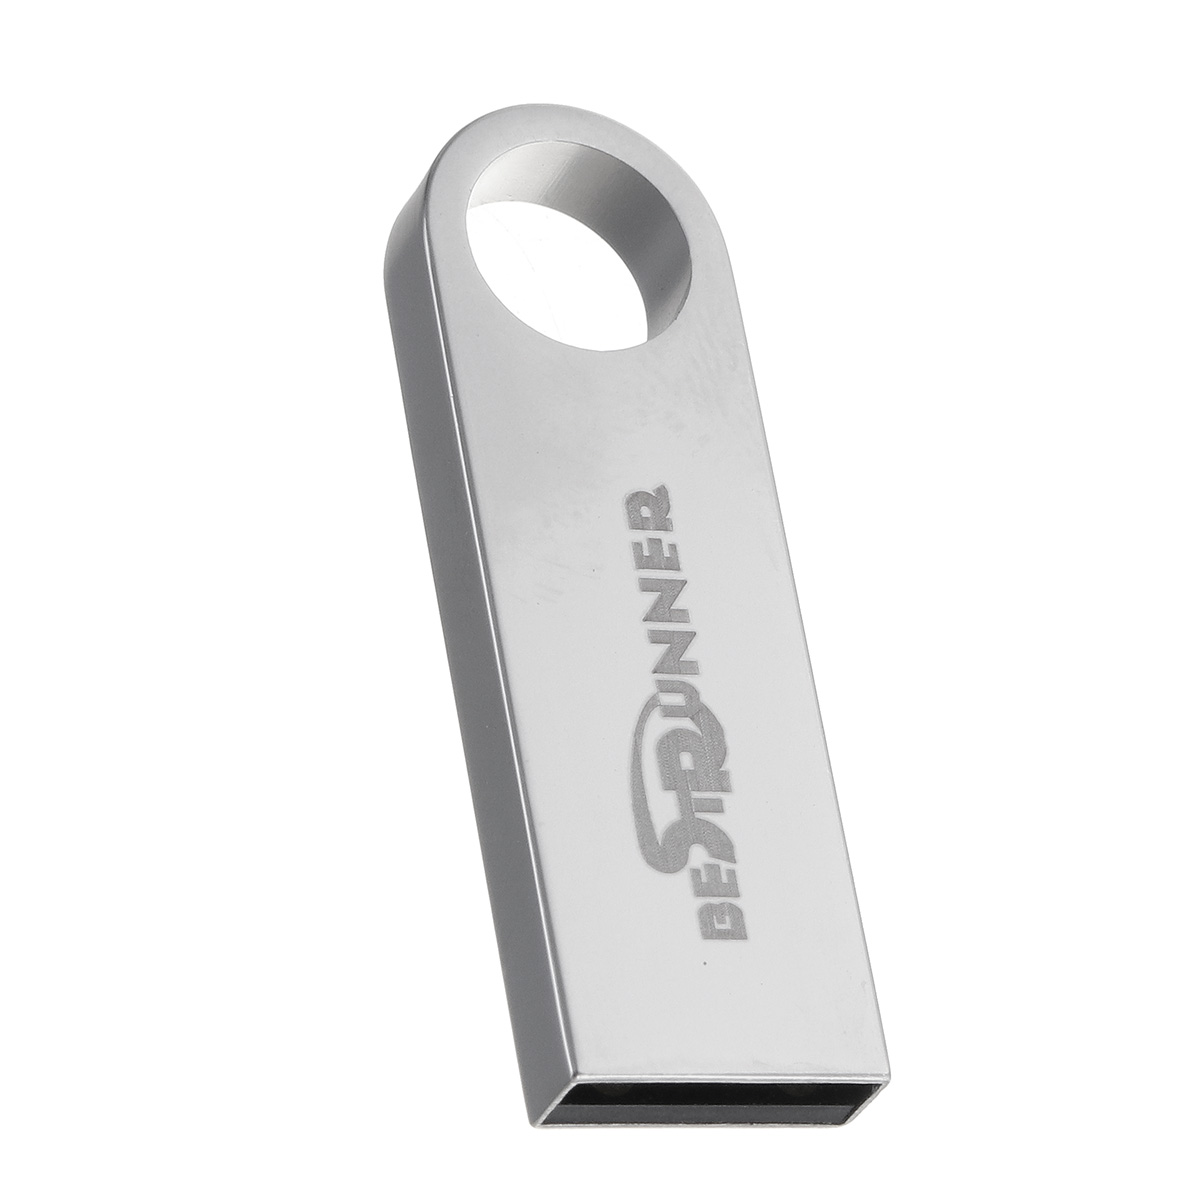 Find 32/64GB USB 2 0 Flash Drive Metal Flash Memory Card USB Stick Pen Drive U Disk for Sale on Gipsybee.com with cryptocurrencies